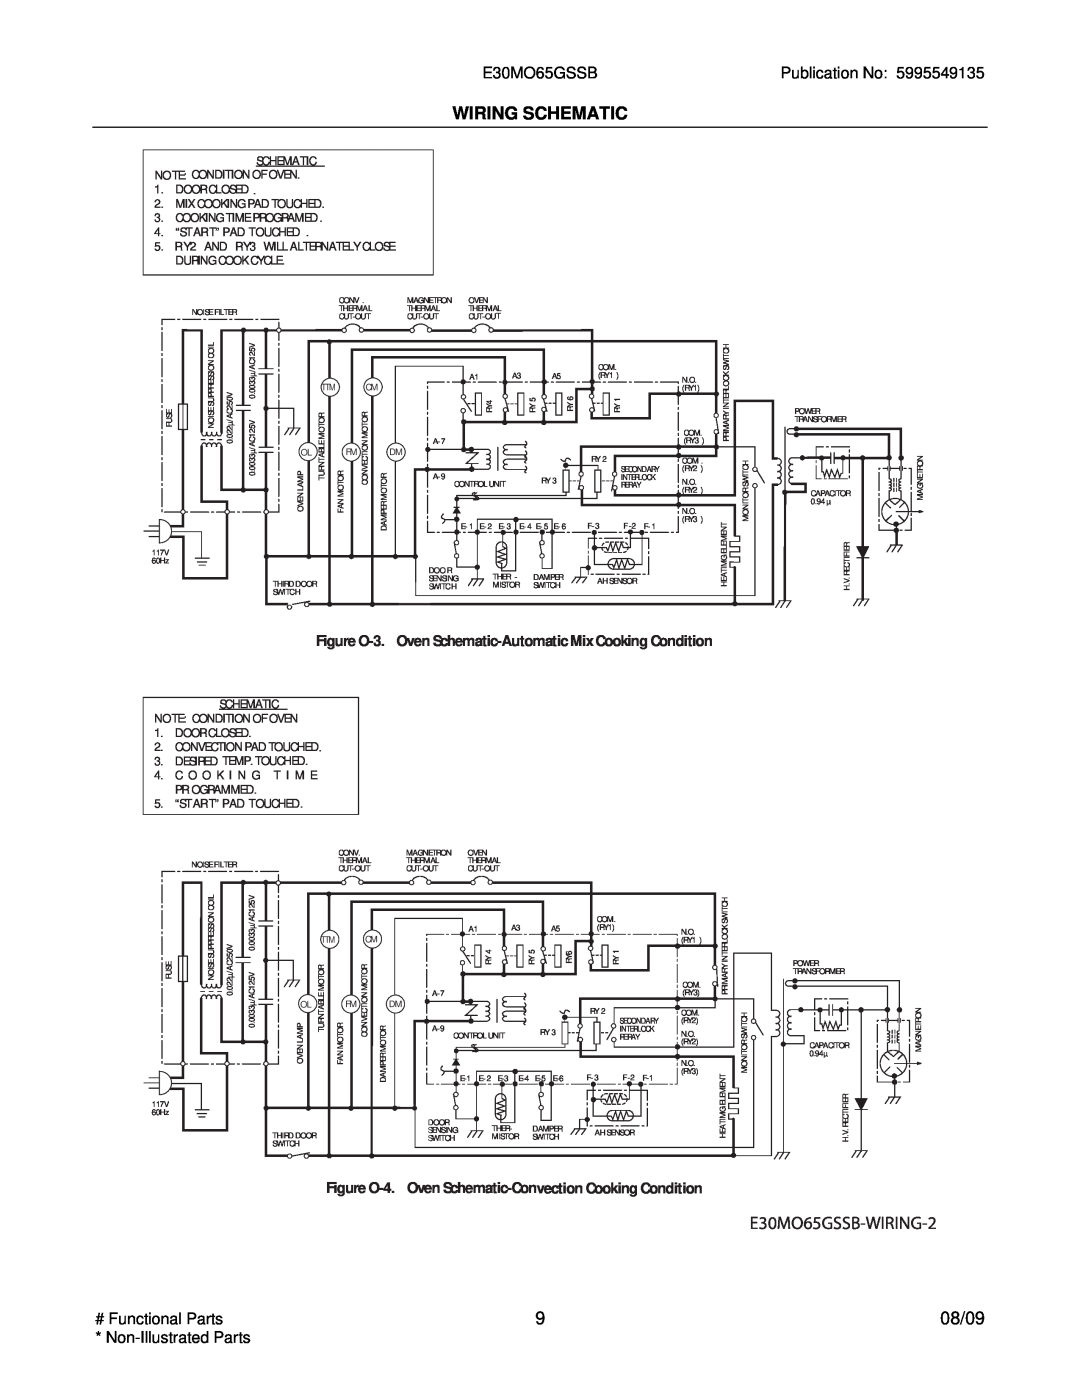 Electrolux Wiring Schematic, E30MO65GSSB-WIRING-2, Publication No, SCHEMATIC NOTE CONDITION OFOVEN 1. DOOR CLOSED 